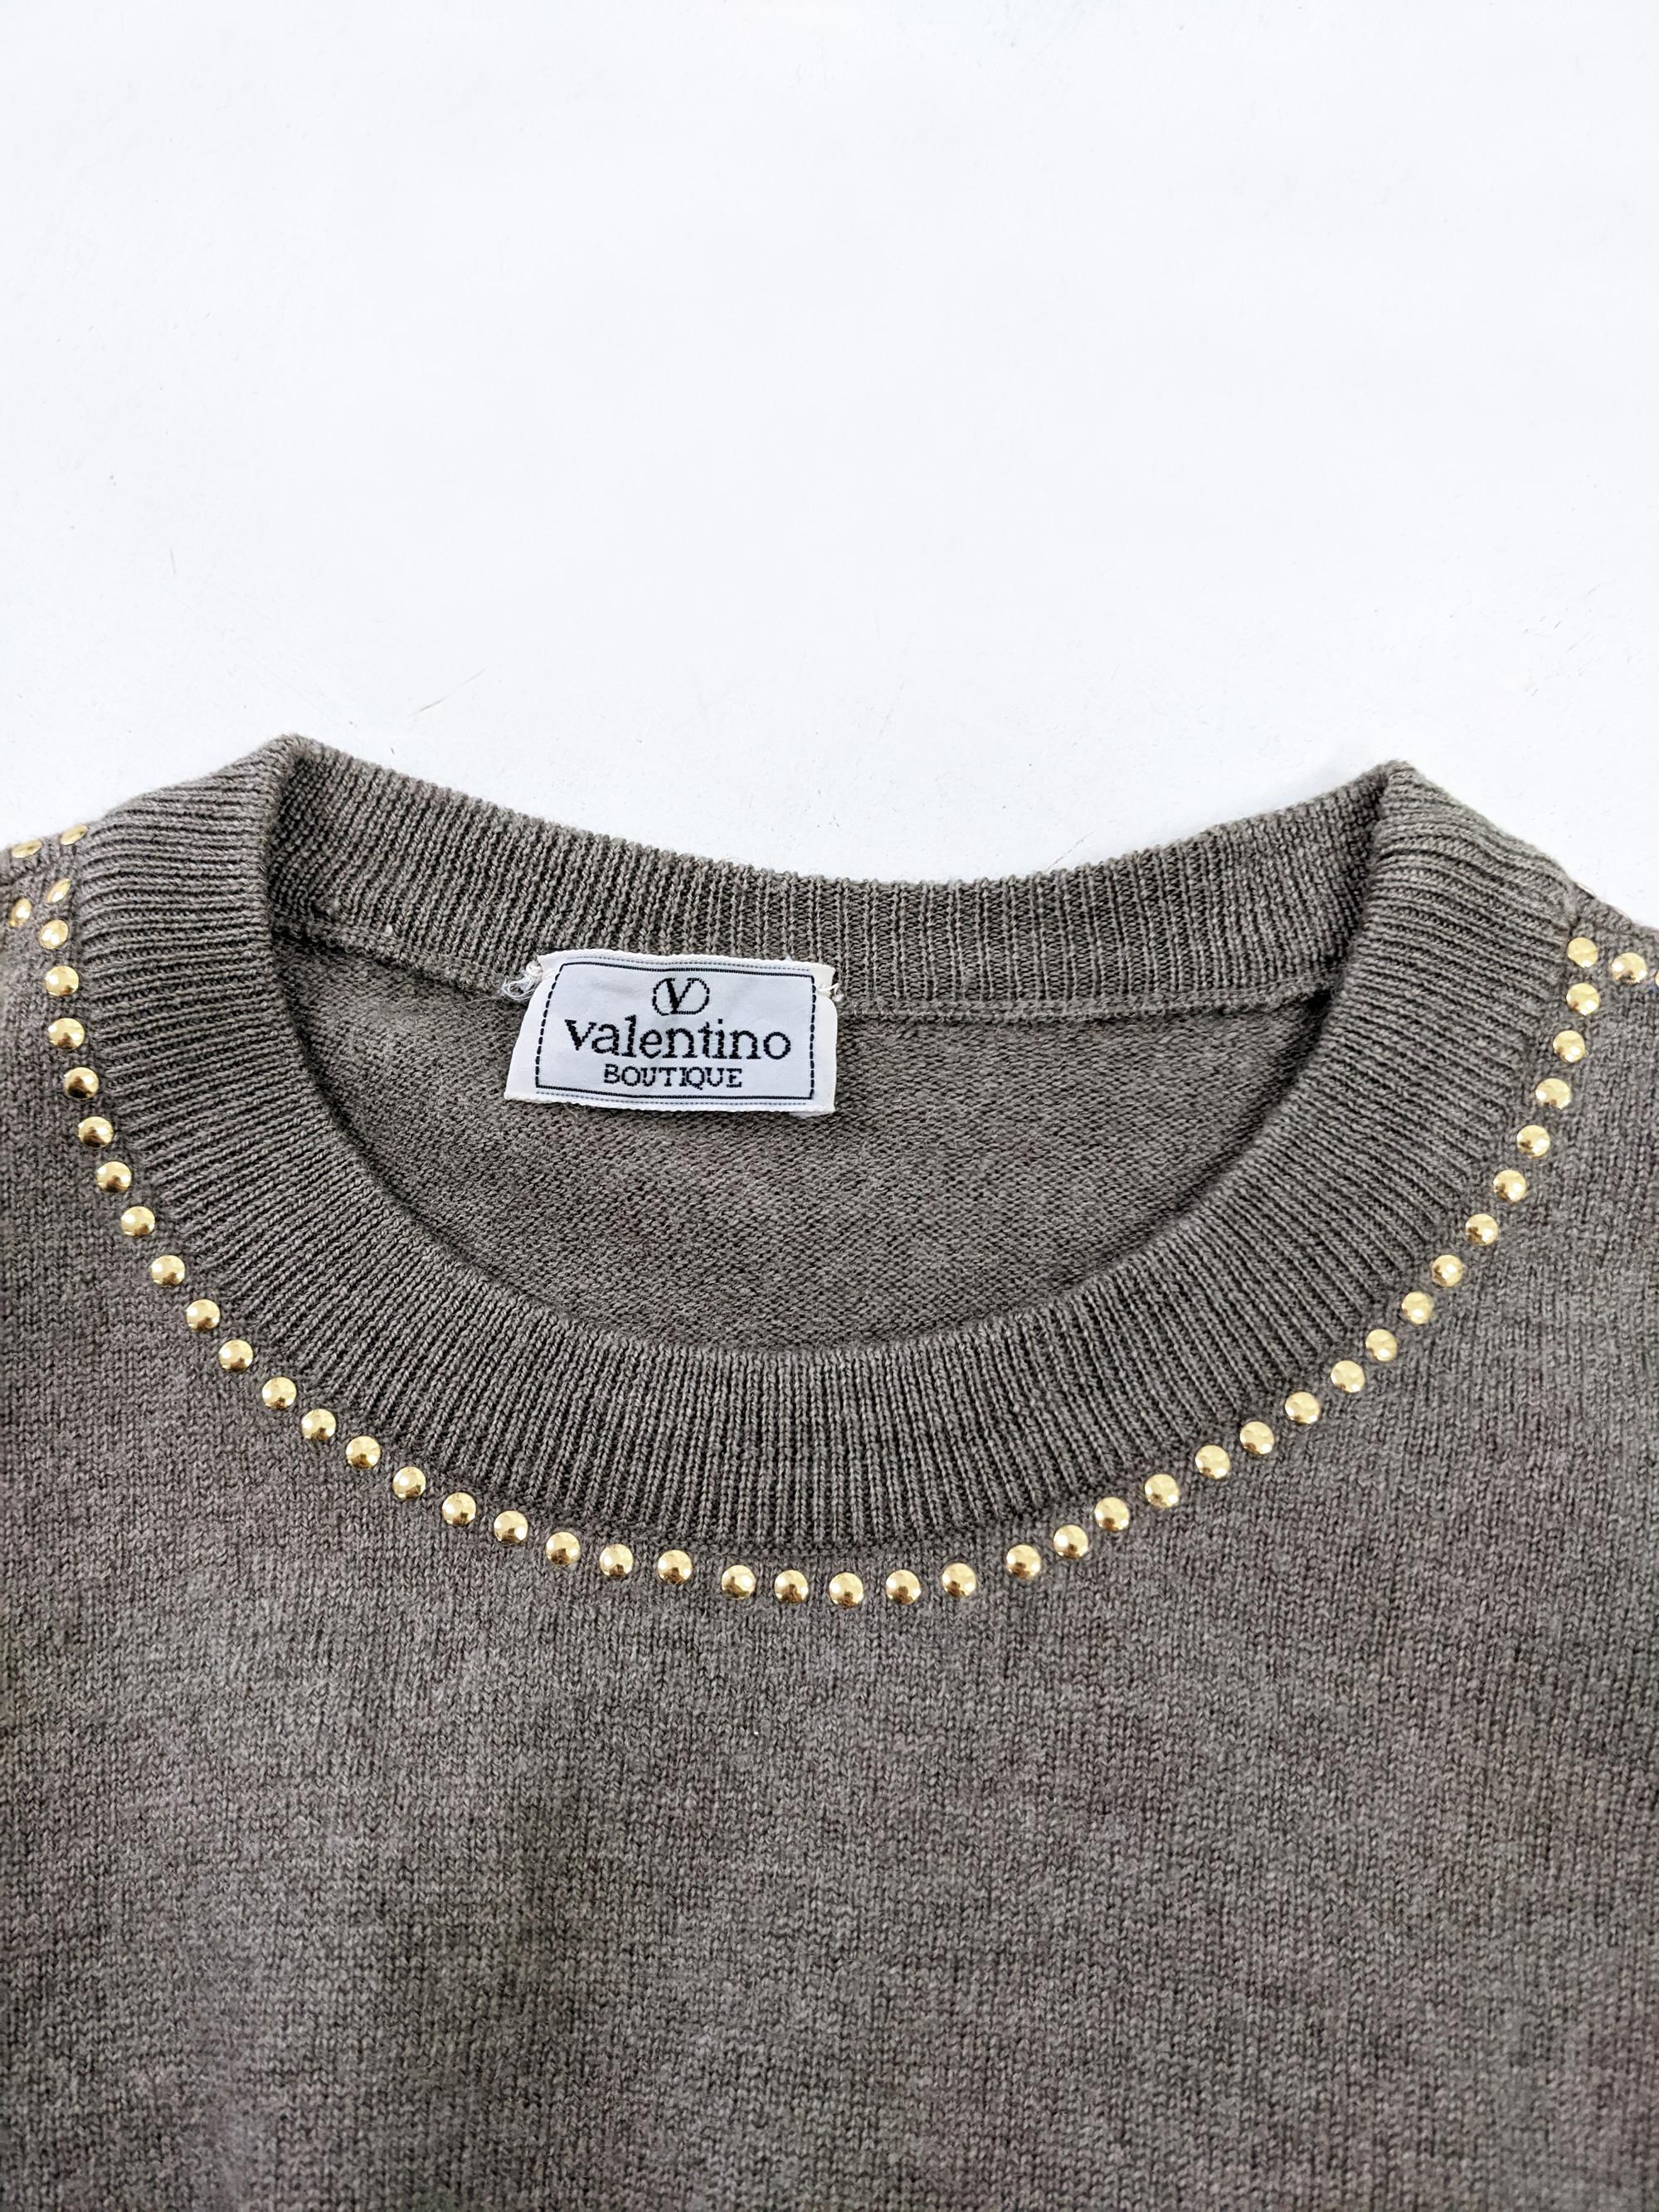 Women's Valentino Vintage Taupe Wool Studded Puff Sleeve Knitwear Sweater Jumper, 1980s For Sale